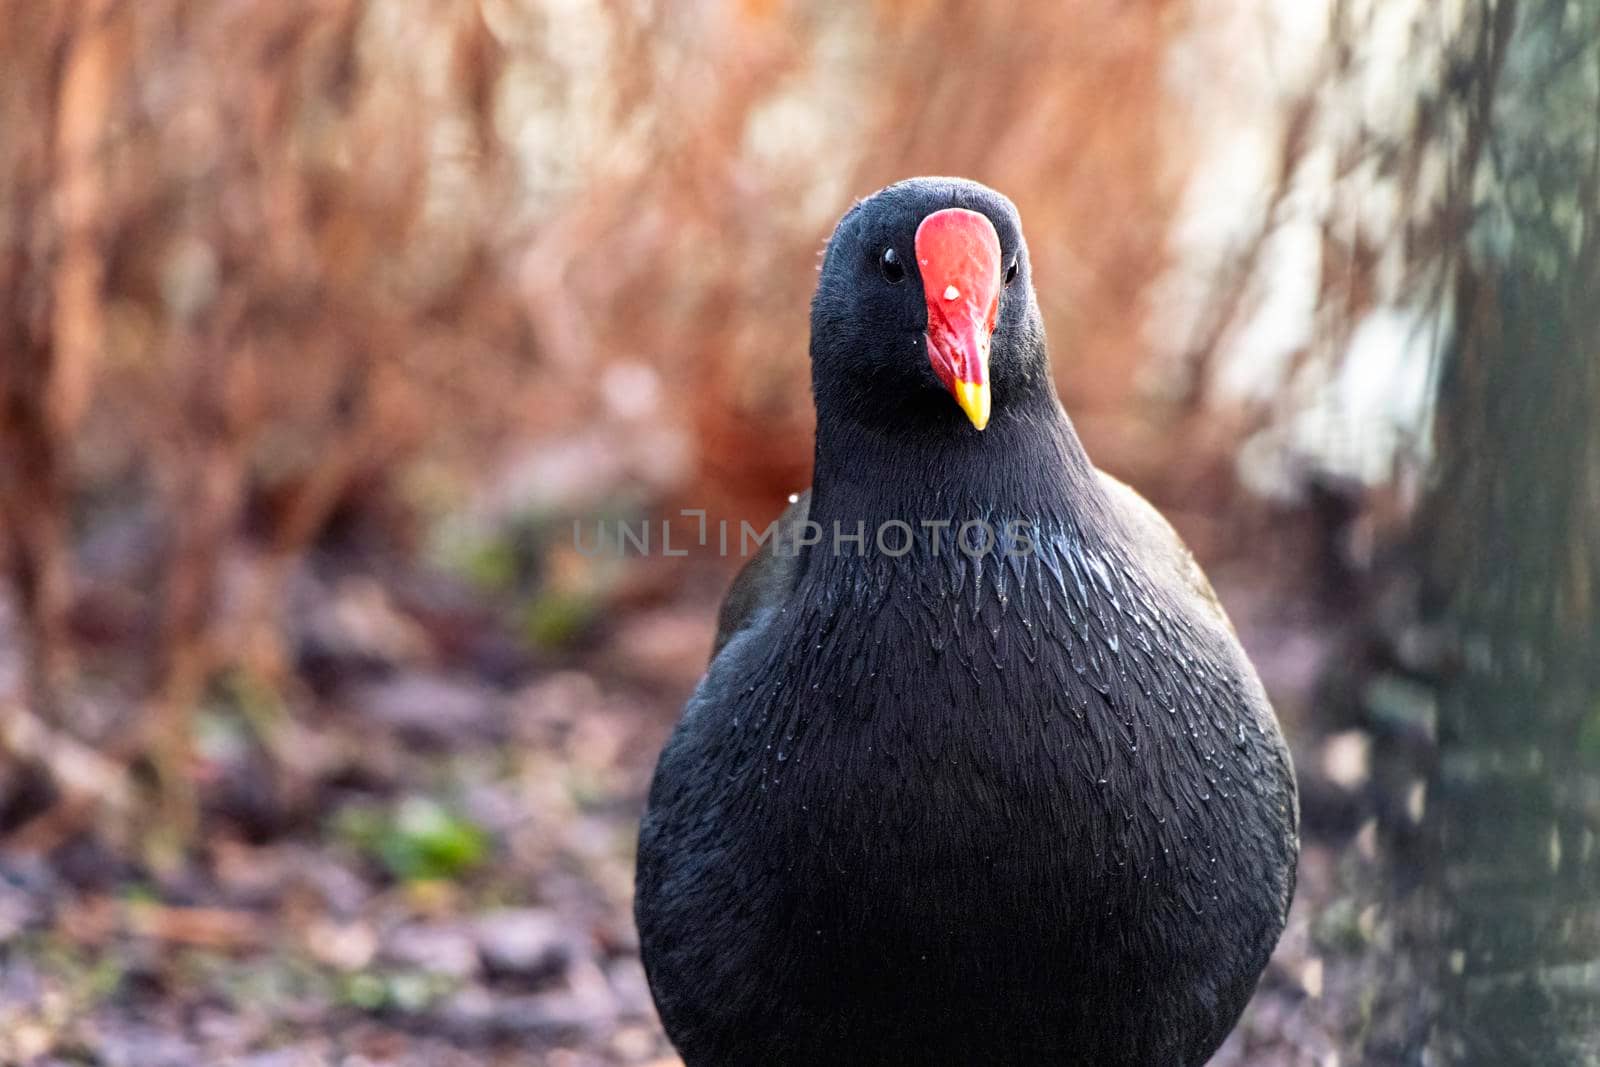 The common moorhen, also known as the waterhen or swamp chicken, is a bird species in the rail family. The common moorhen lives around well-vegetated marshes, ponds, canals and other wetlands.